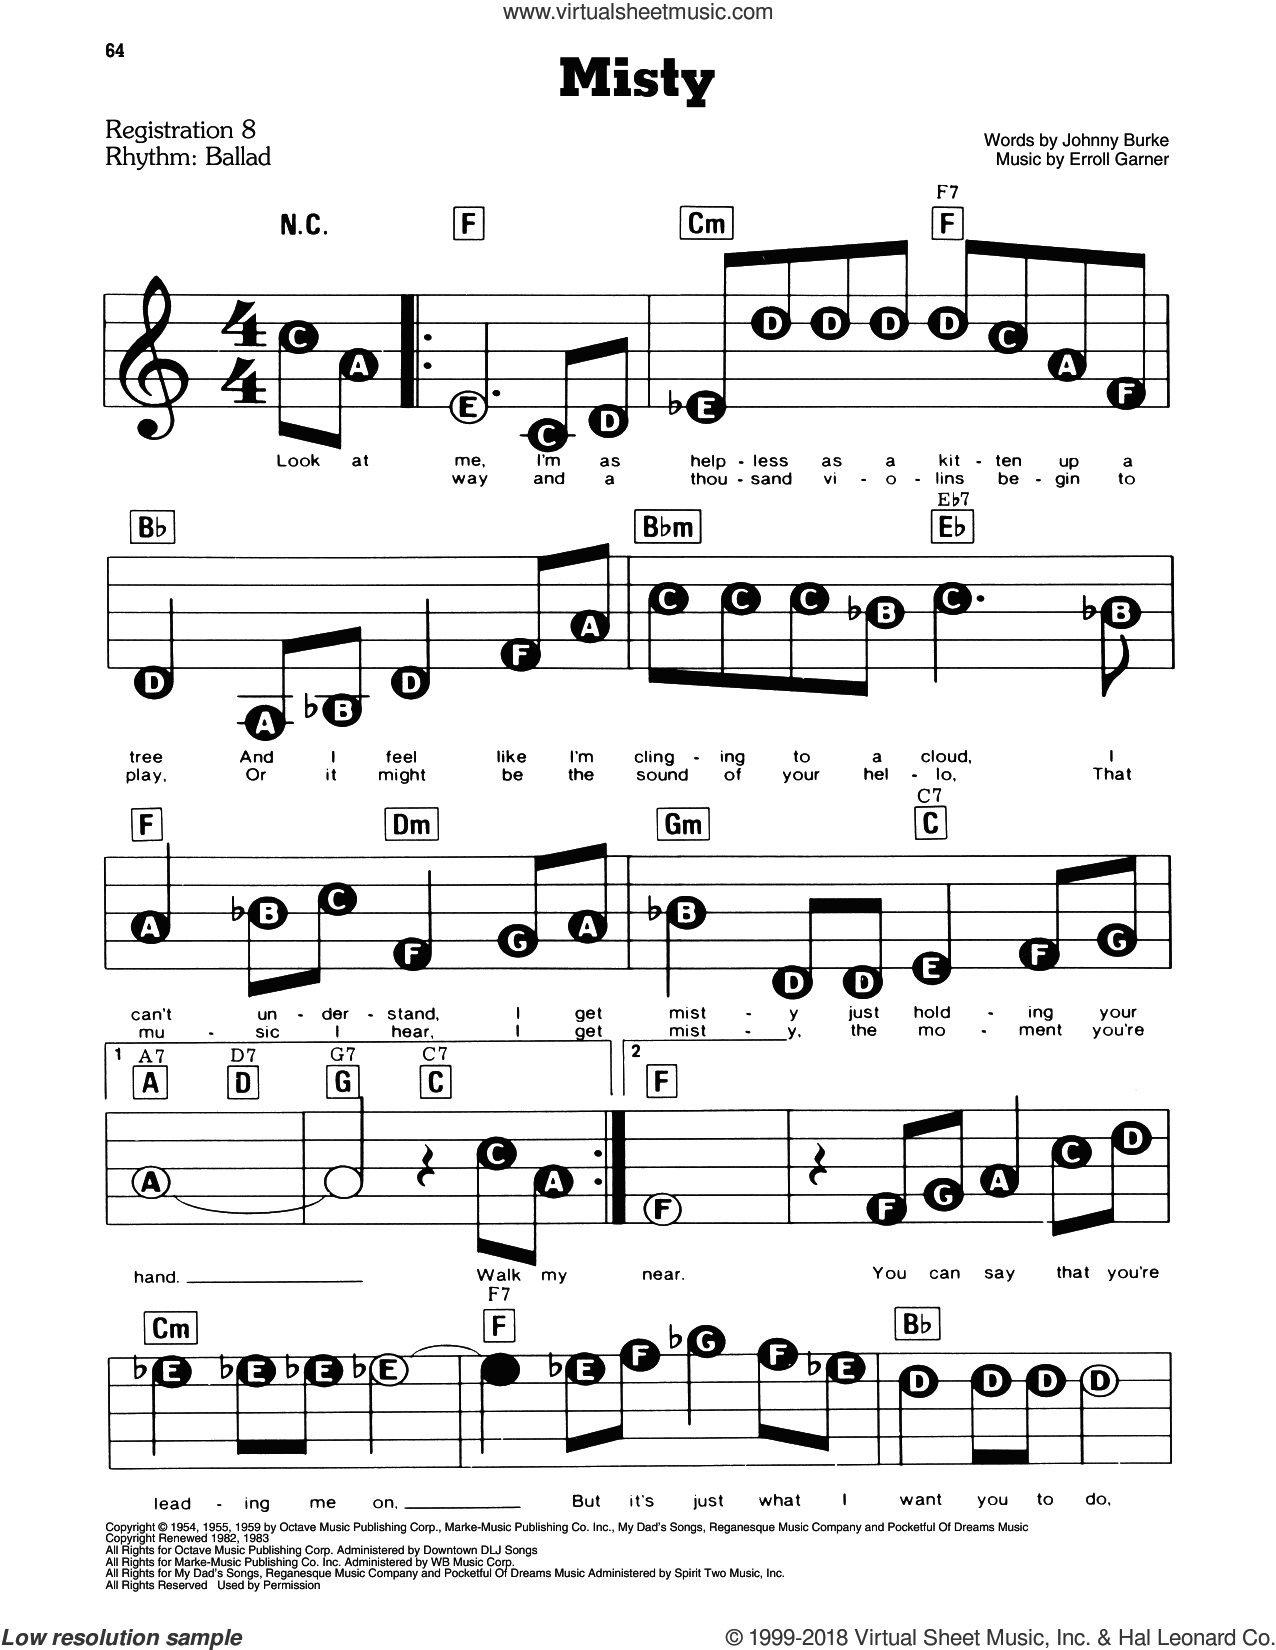 Misty sheet music for piano or keyboard (E-Z Play) (PDF)